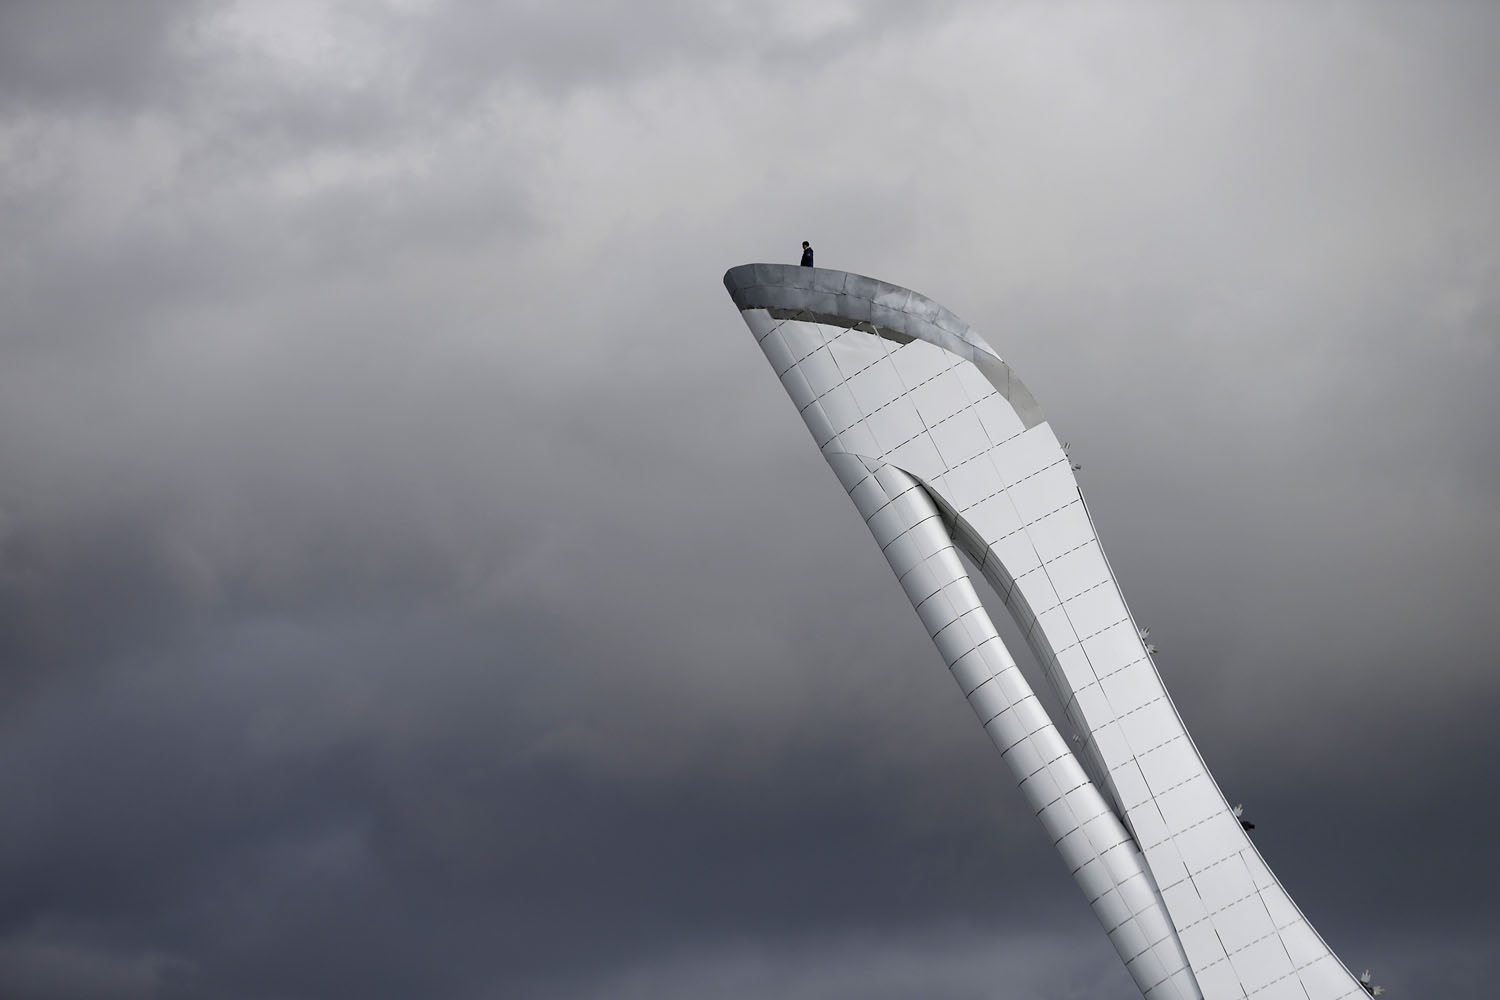 Feb. 4, 2014. A worker is dwarfed against the sky as he stands at the top of the Olympic cauldron ahead of the 2014 Winter Olympics in Sochi, Russia.